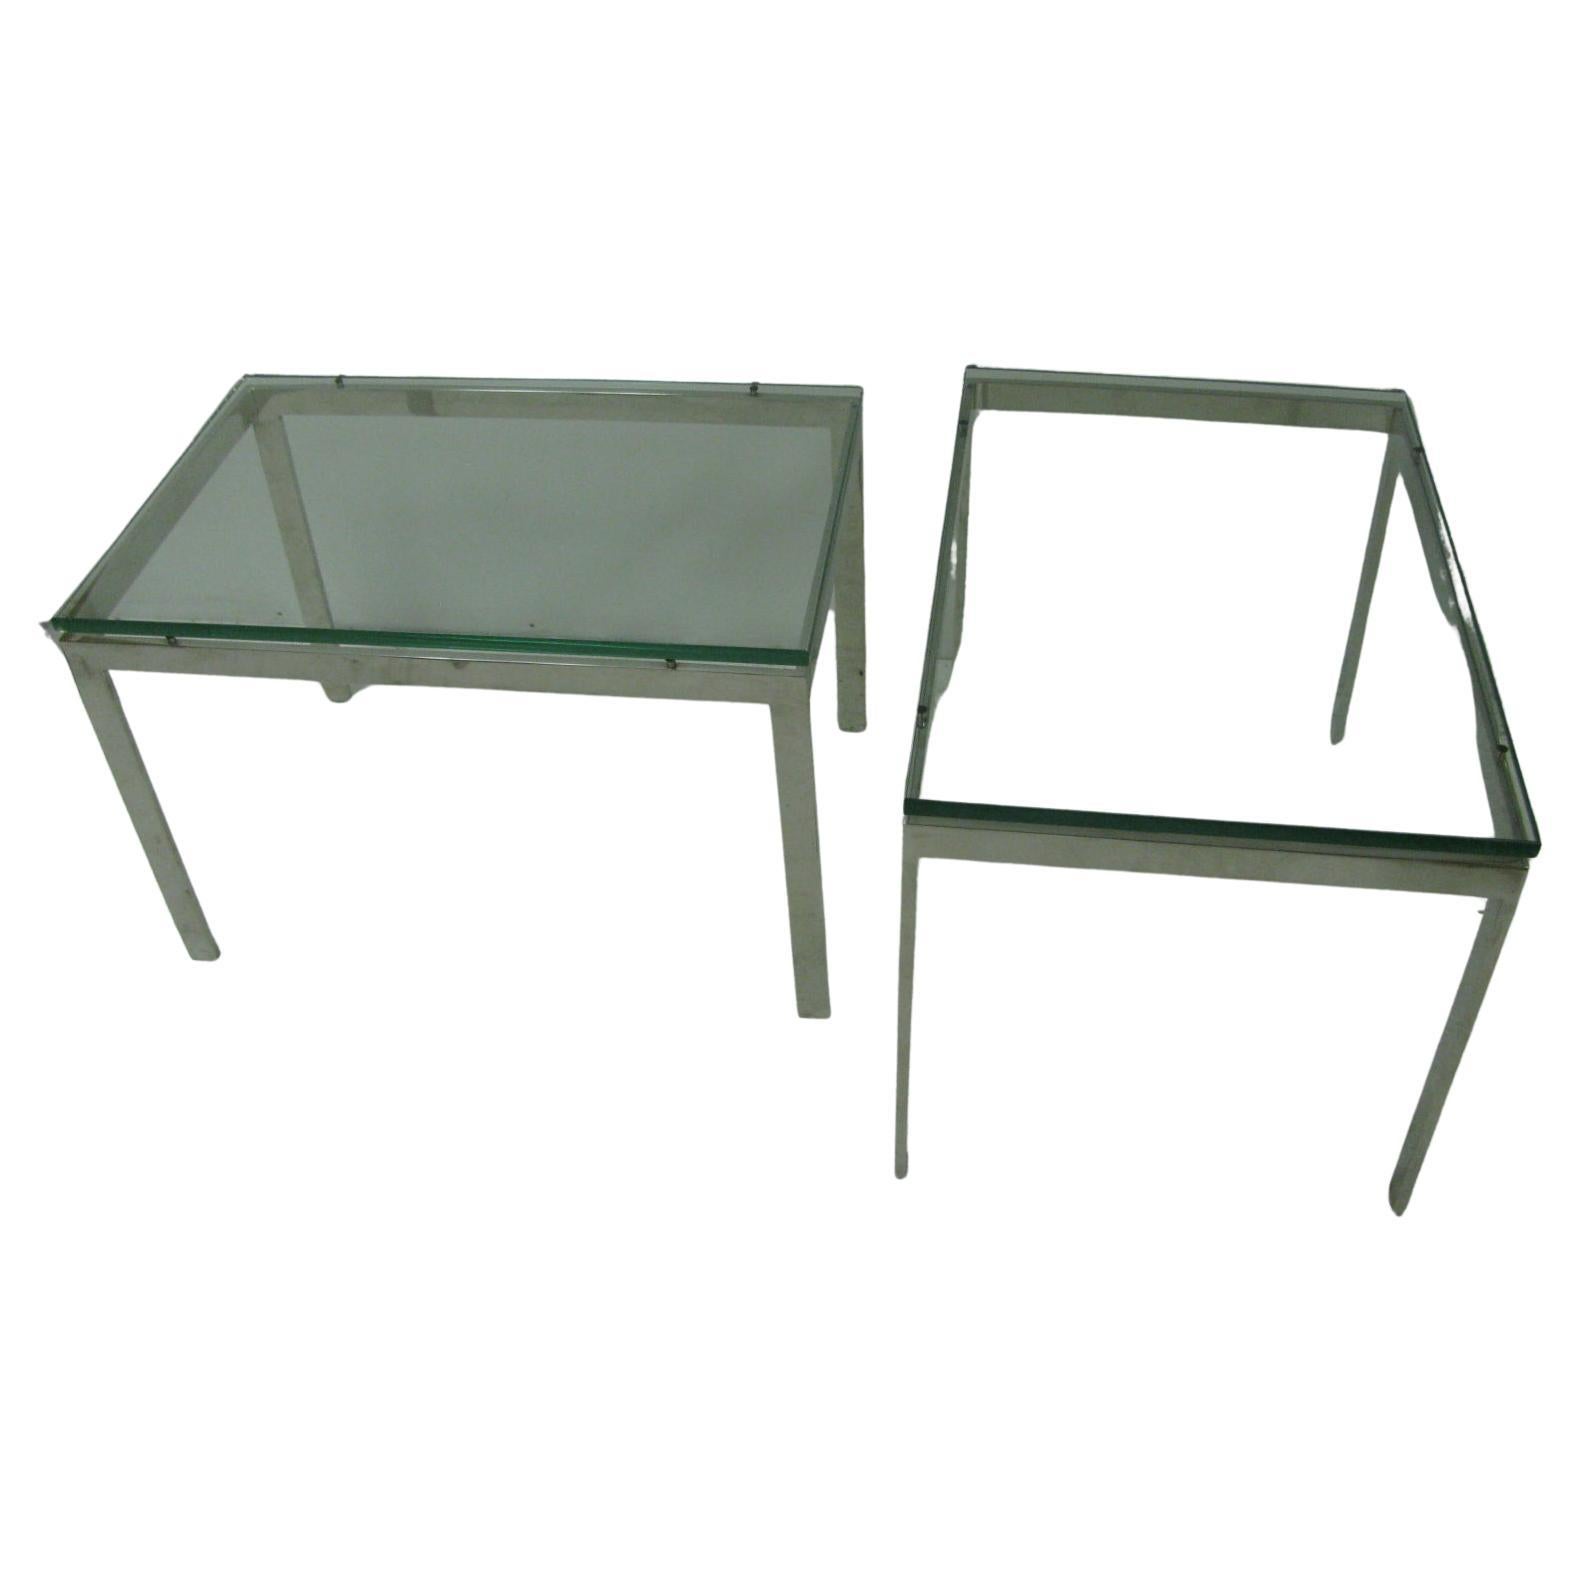 Floating glass rests on four bumpers. Heavy duty flat steel construction plated with nickel chrome. Serious weight to these tables. In excellent vintage condition with minimal wear. Priced and sold as a pair.